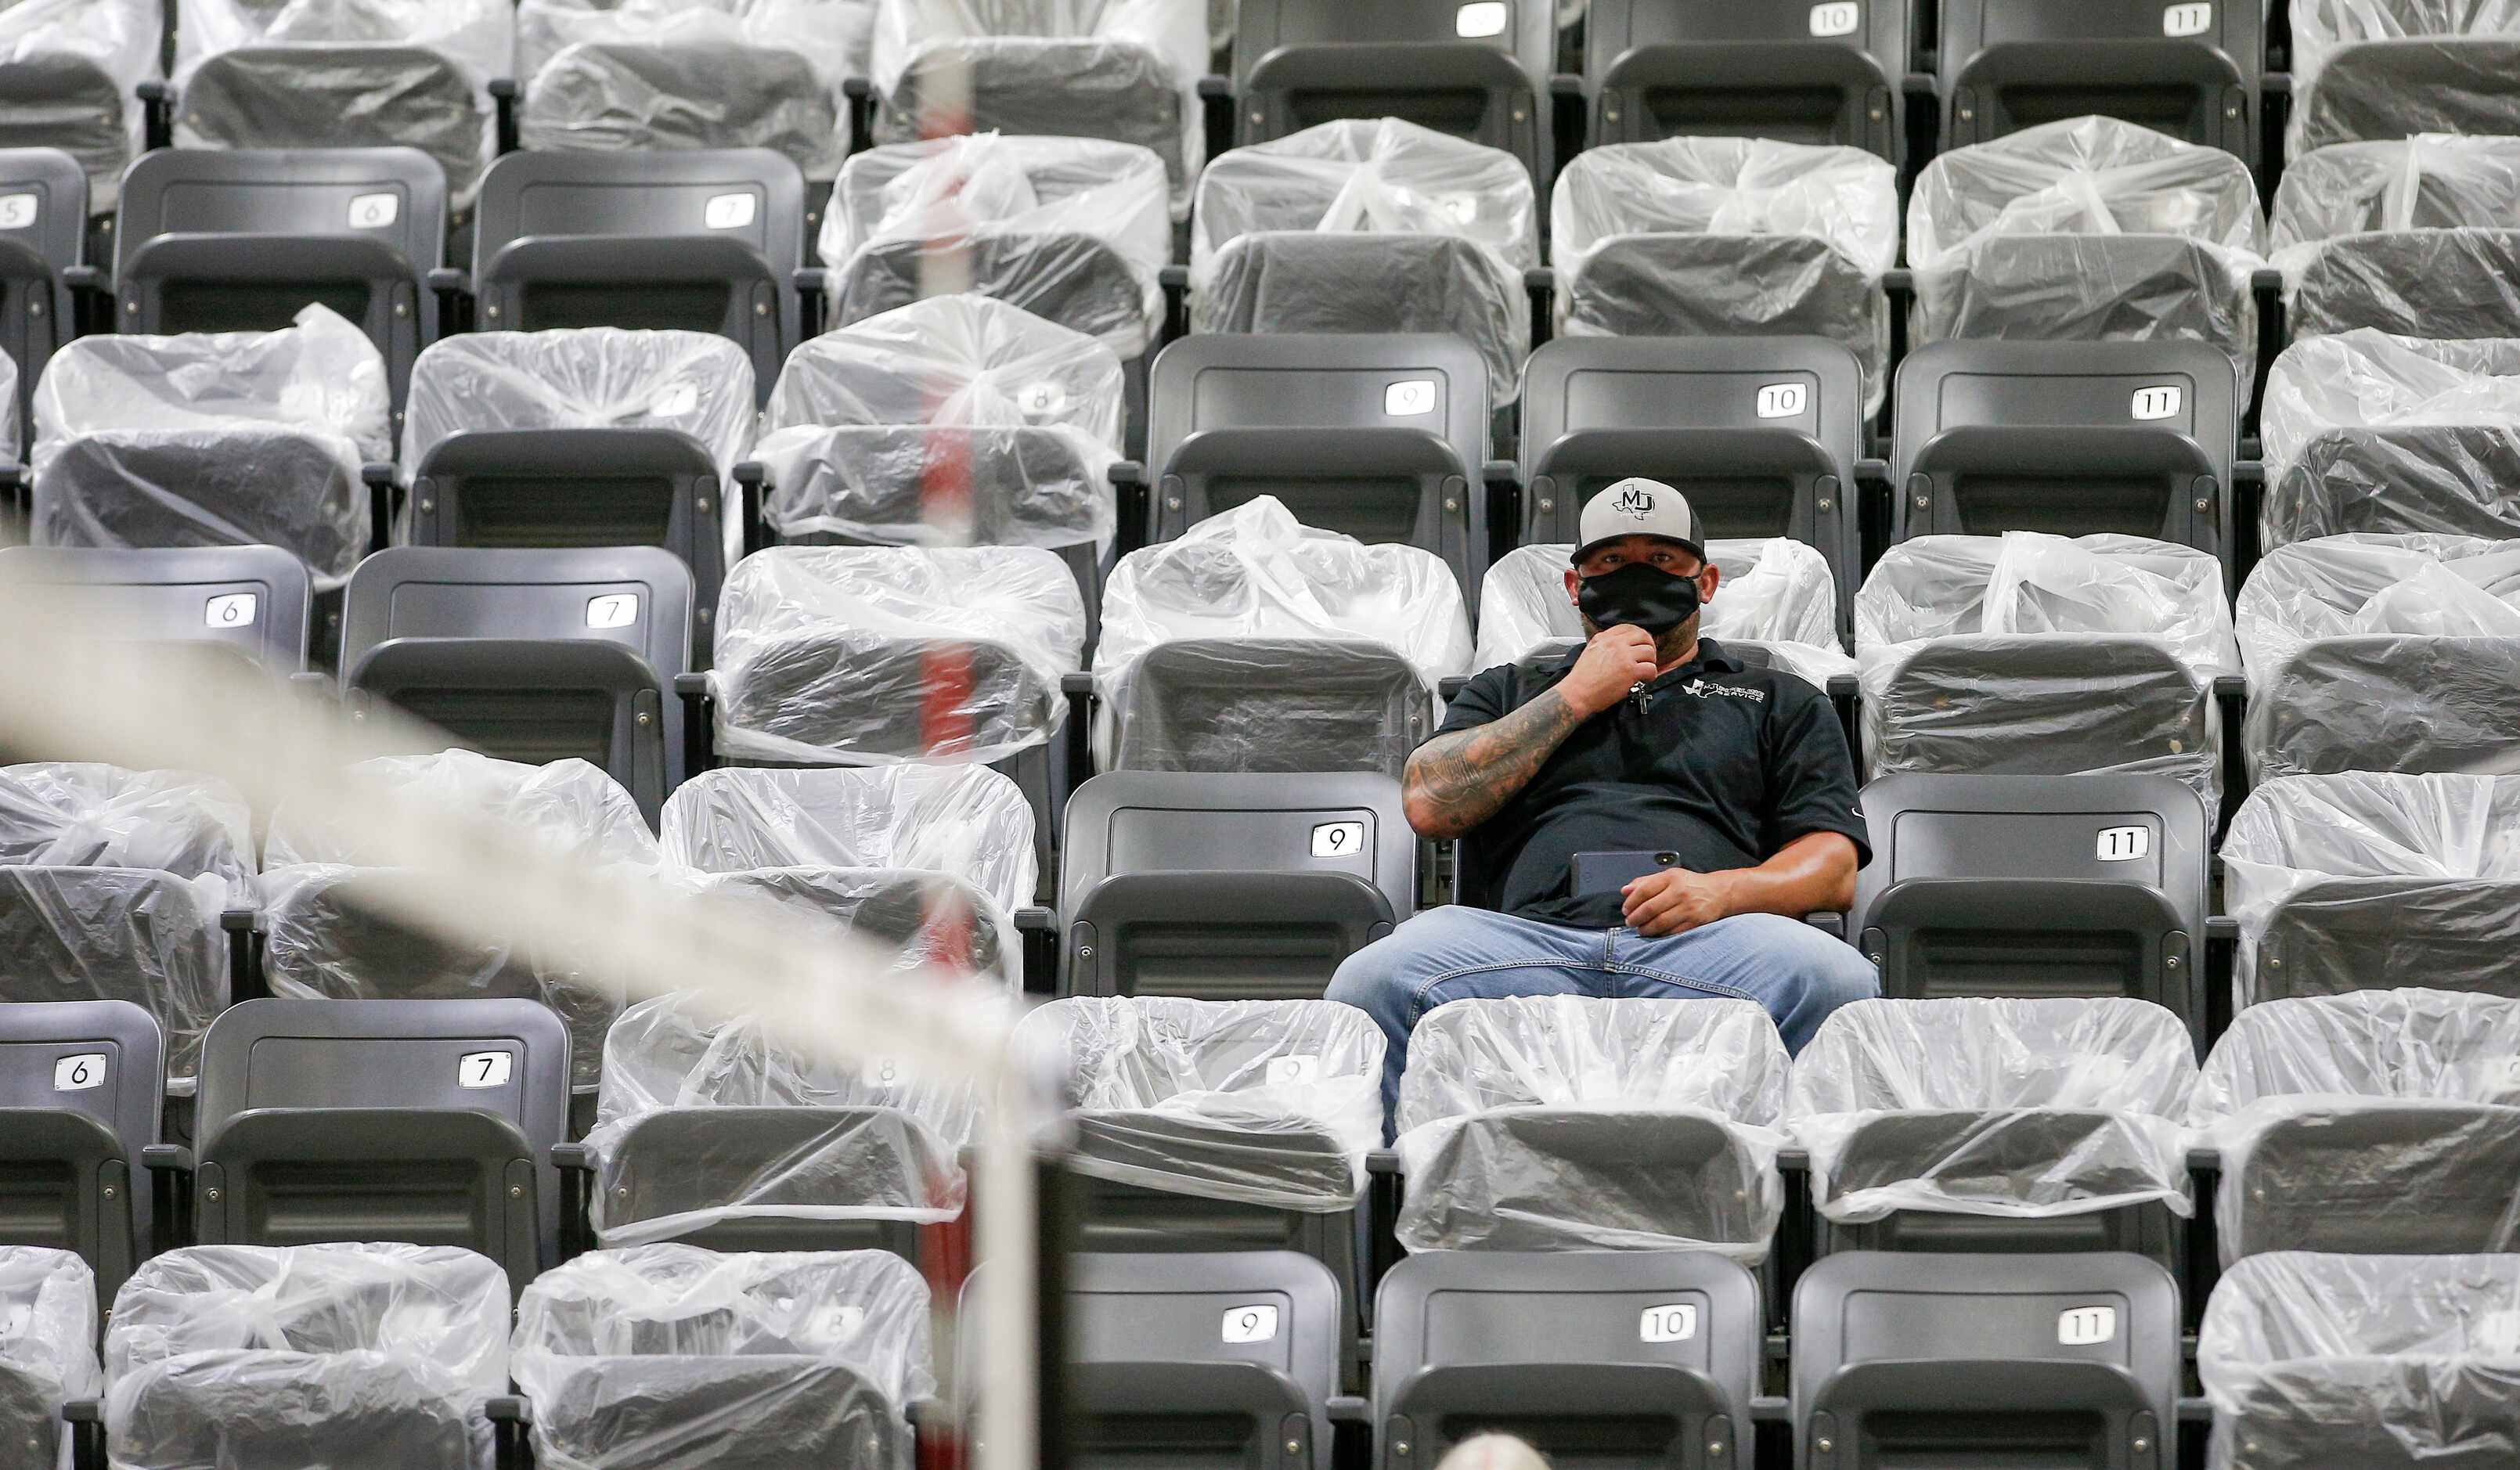 A spectator adjusts his masks with groups of seats with plastic bags cordon off to promote...